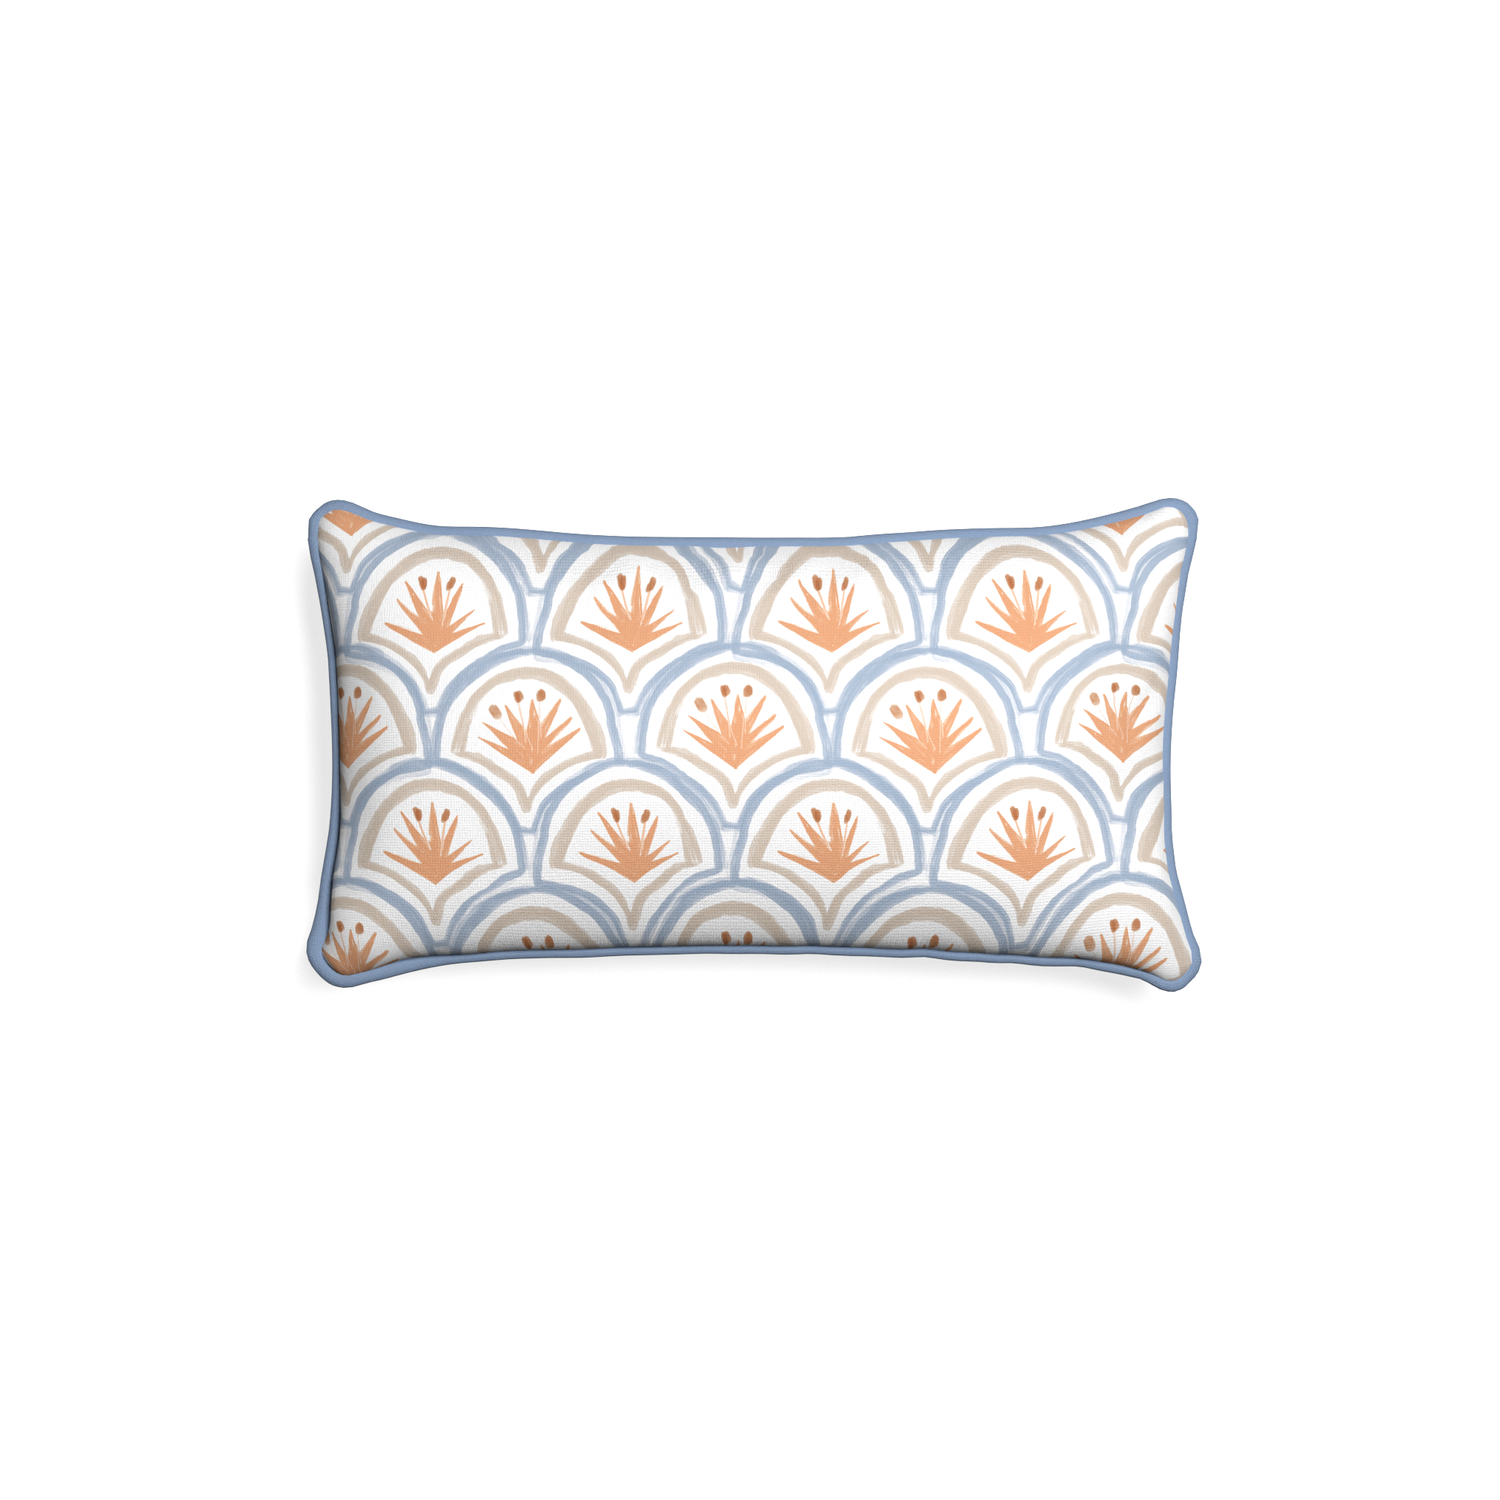 Petite-lumbar thatcher apricot custom art deco palm patternpillow with sky piping on white background